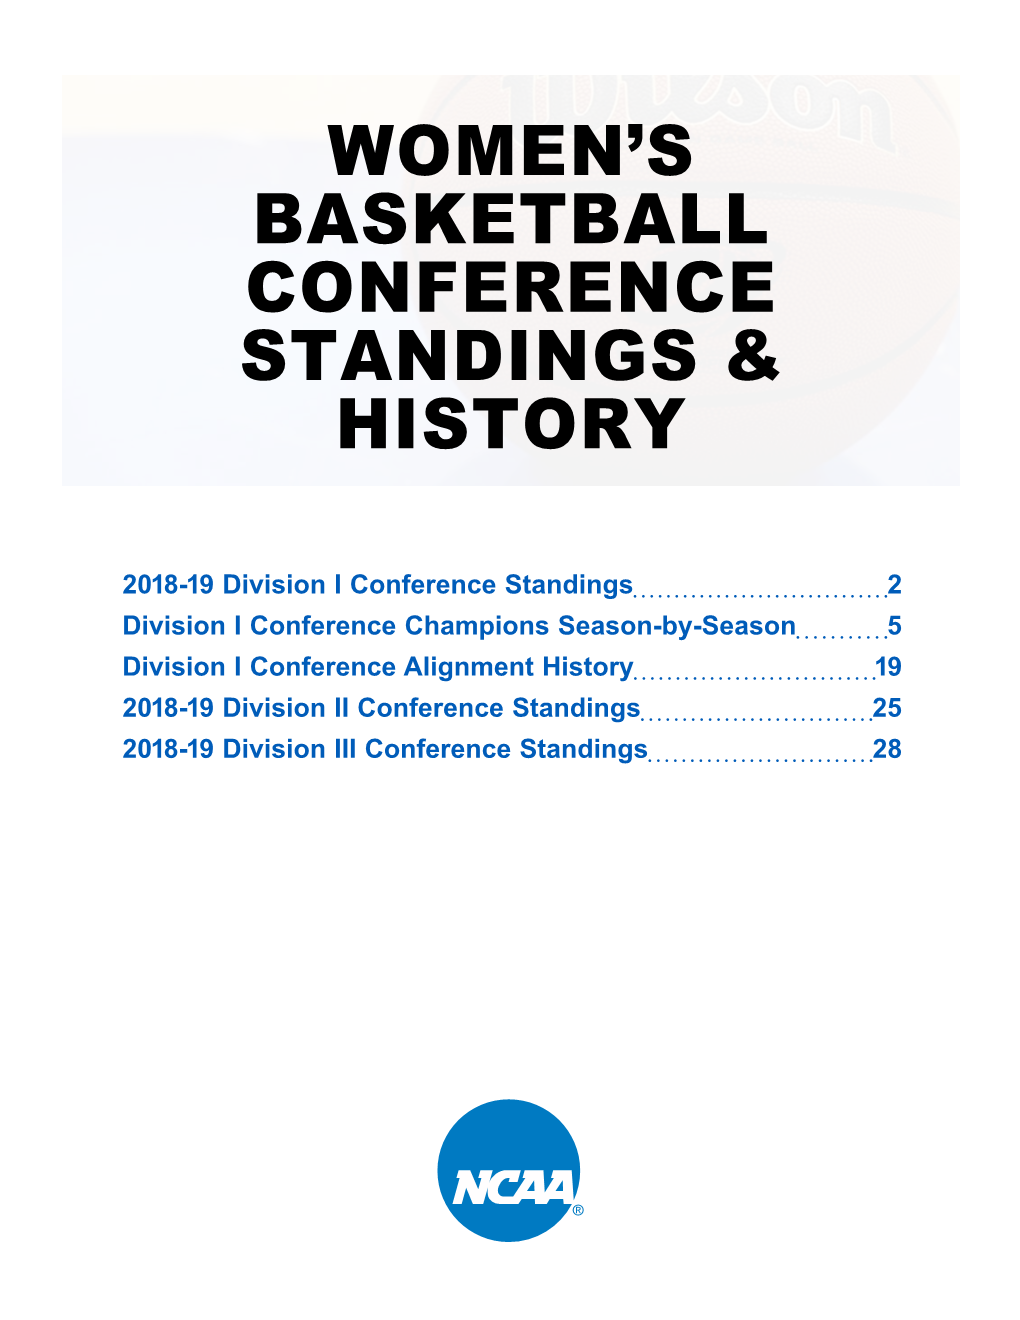 Women's Basketball Conference Standings